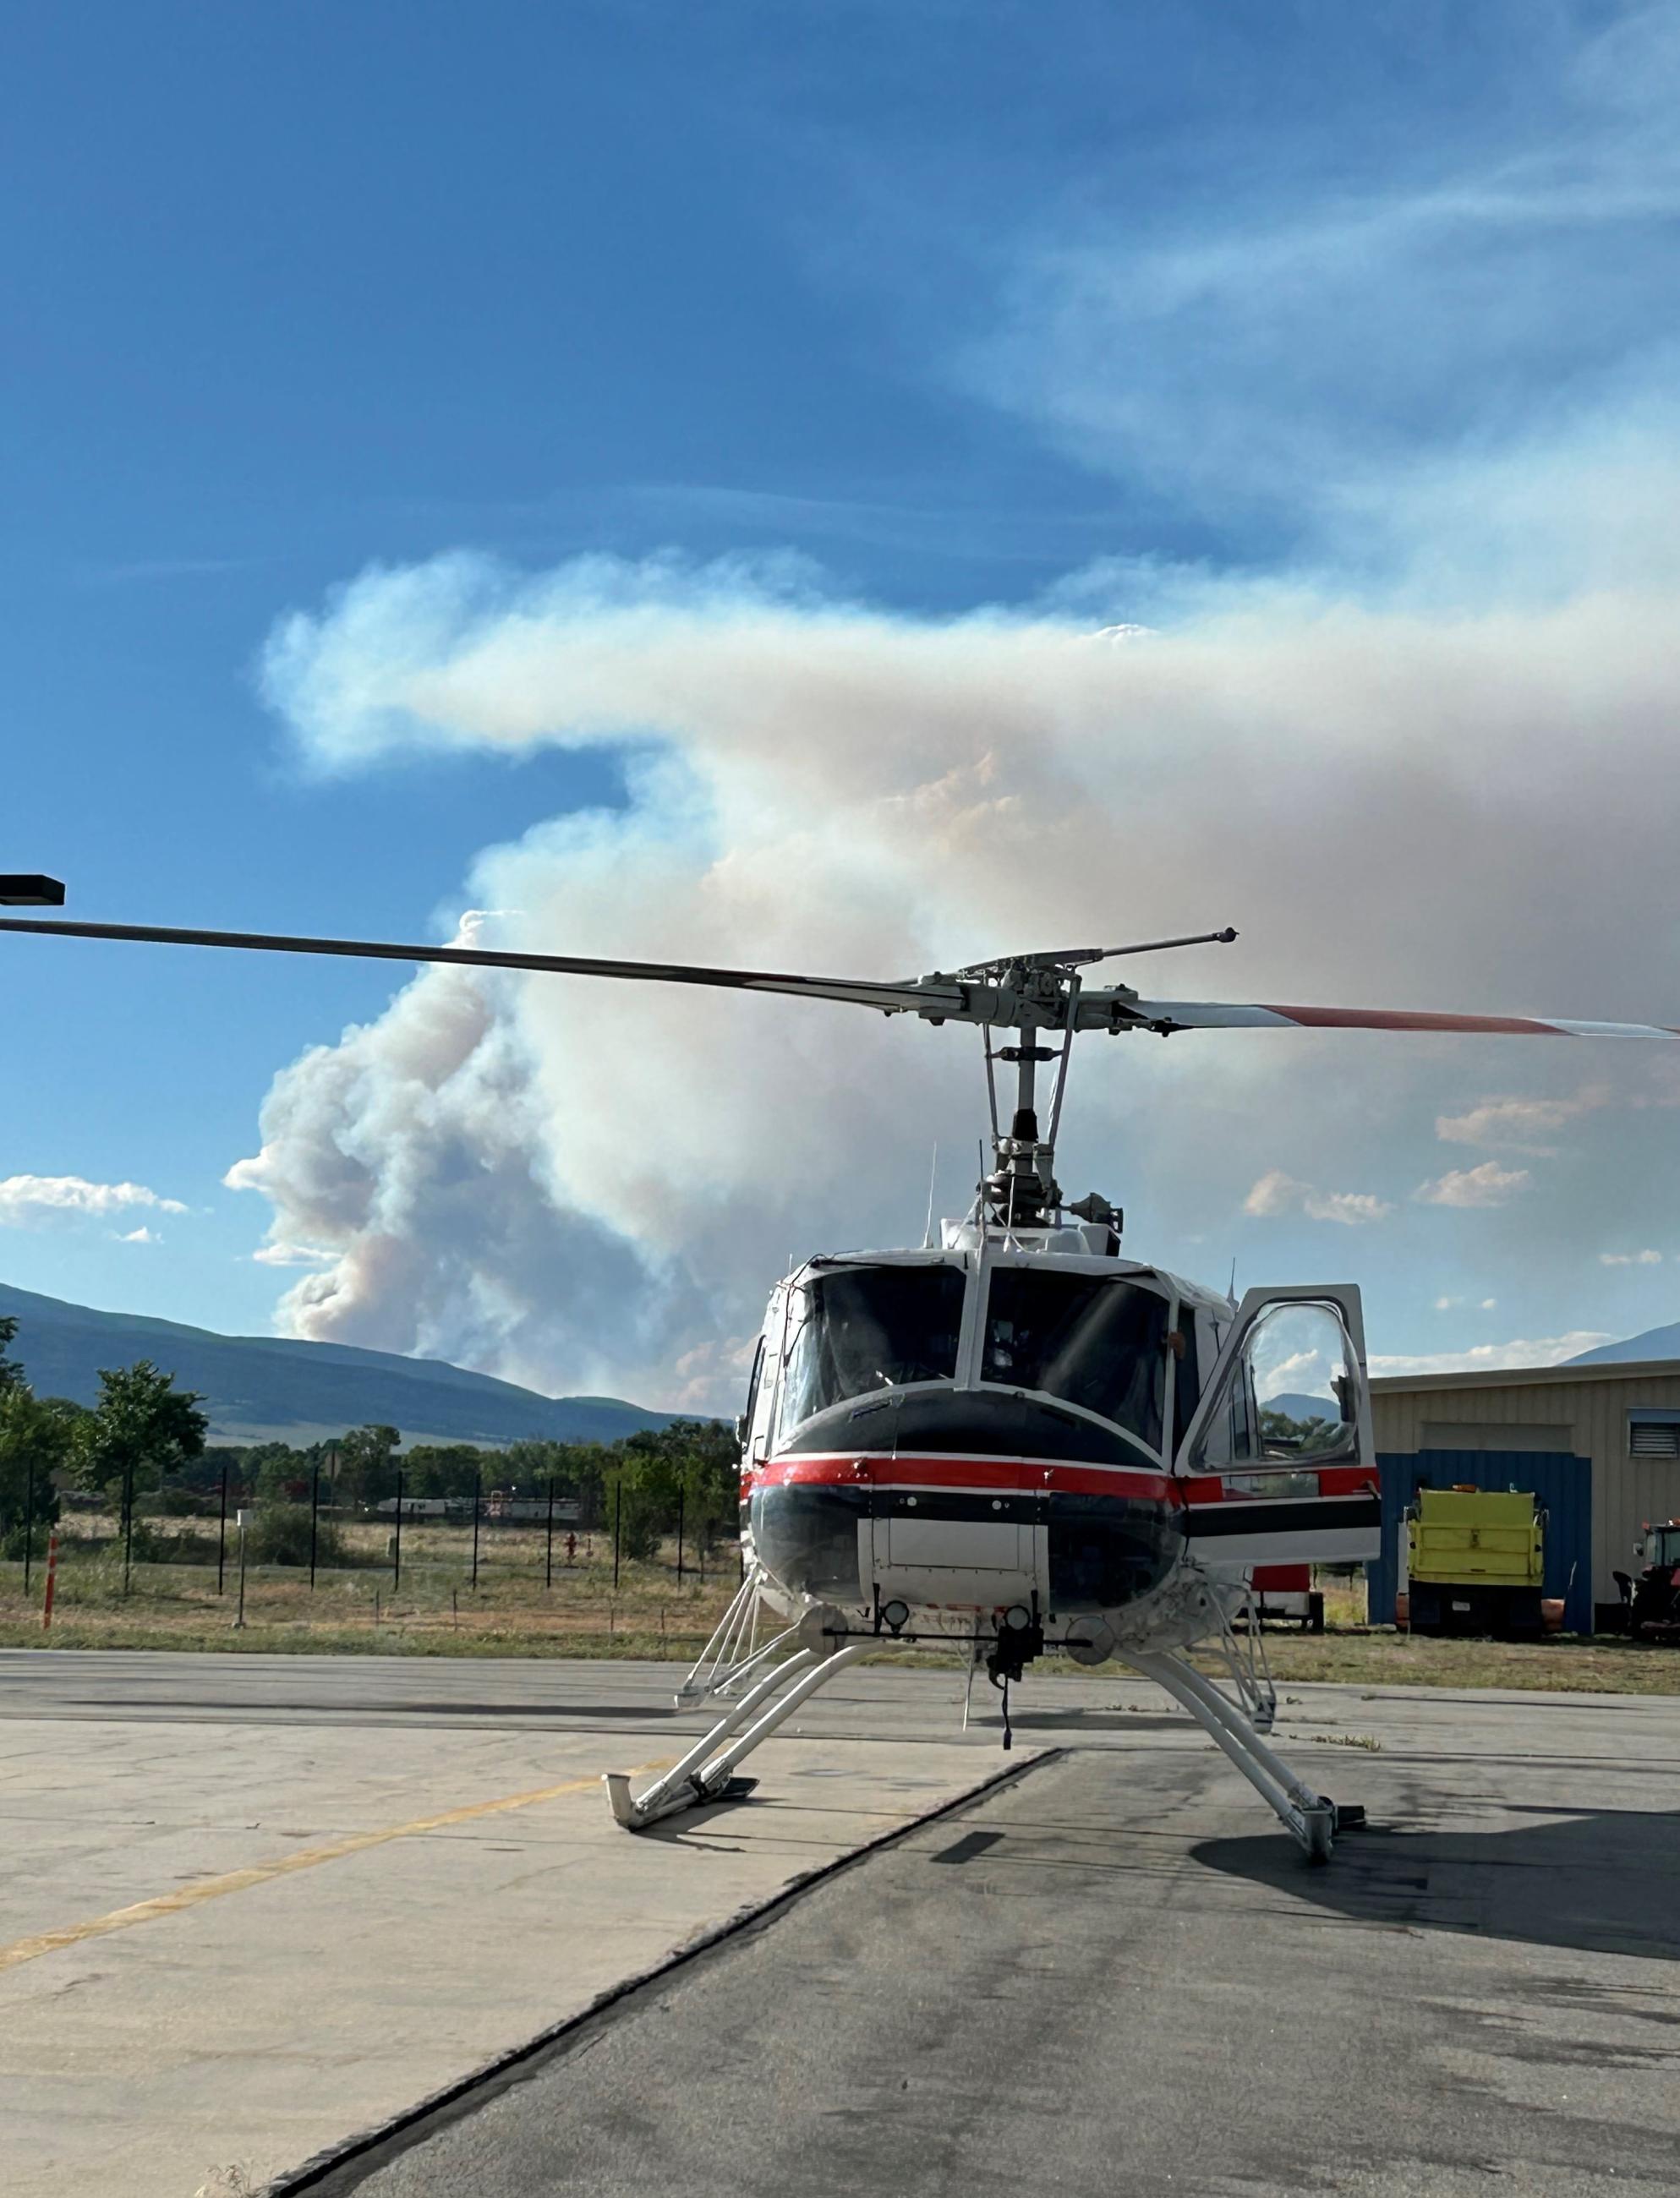 Photo of a helicopter assigned to the Interlaken Fire seating on a paved surface with smoke from the Interlaken Fire in the background. 